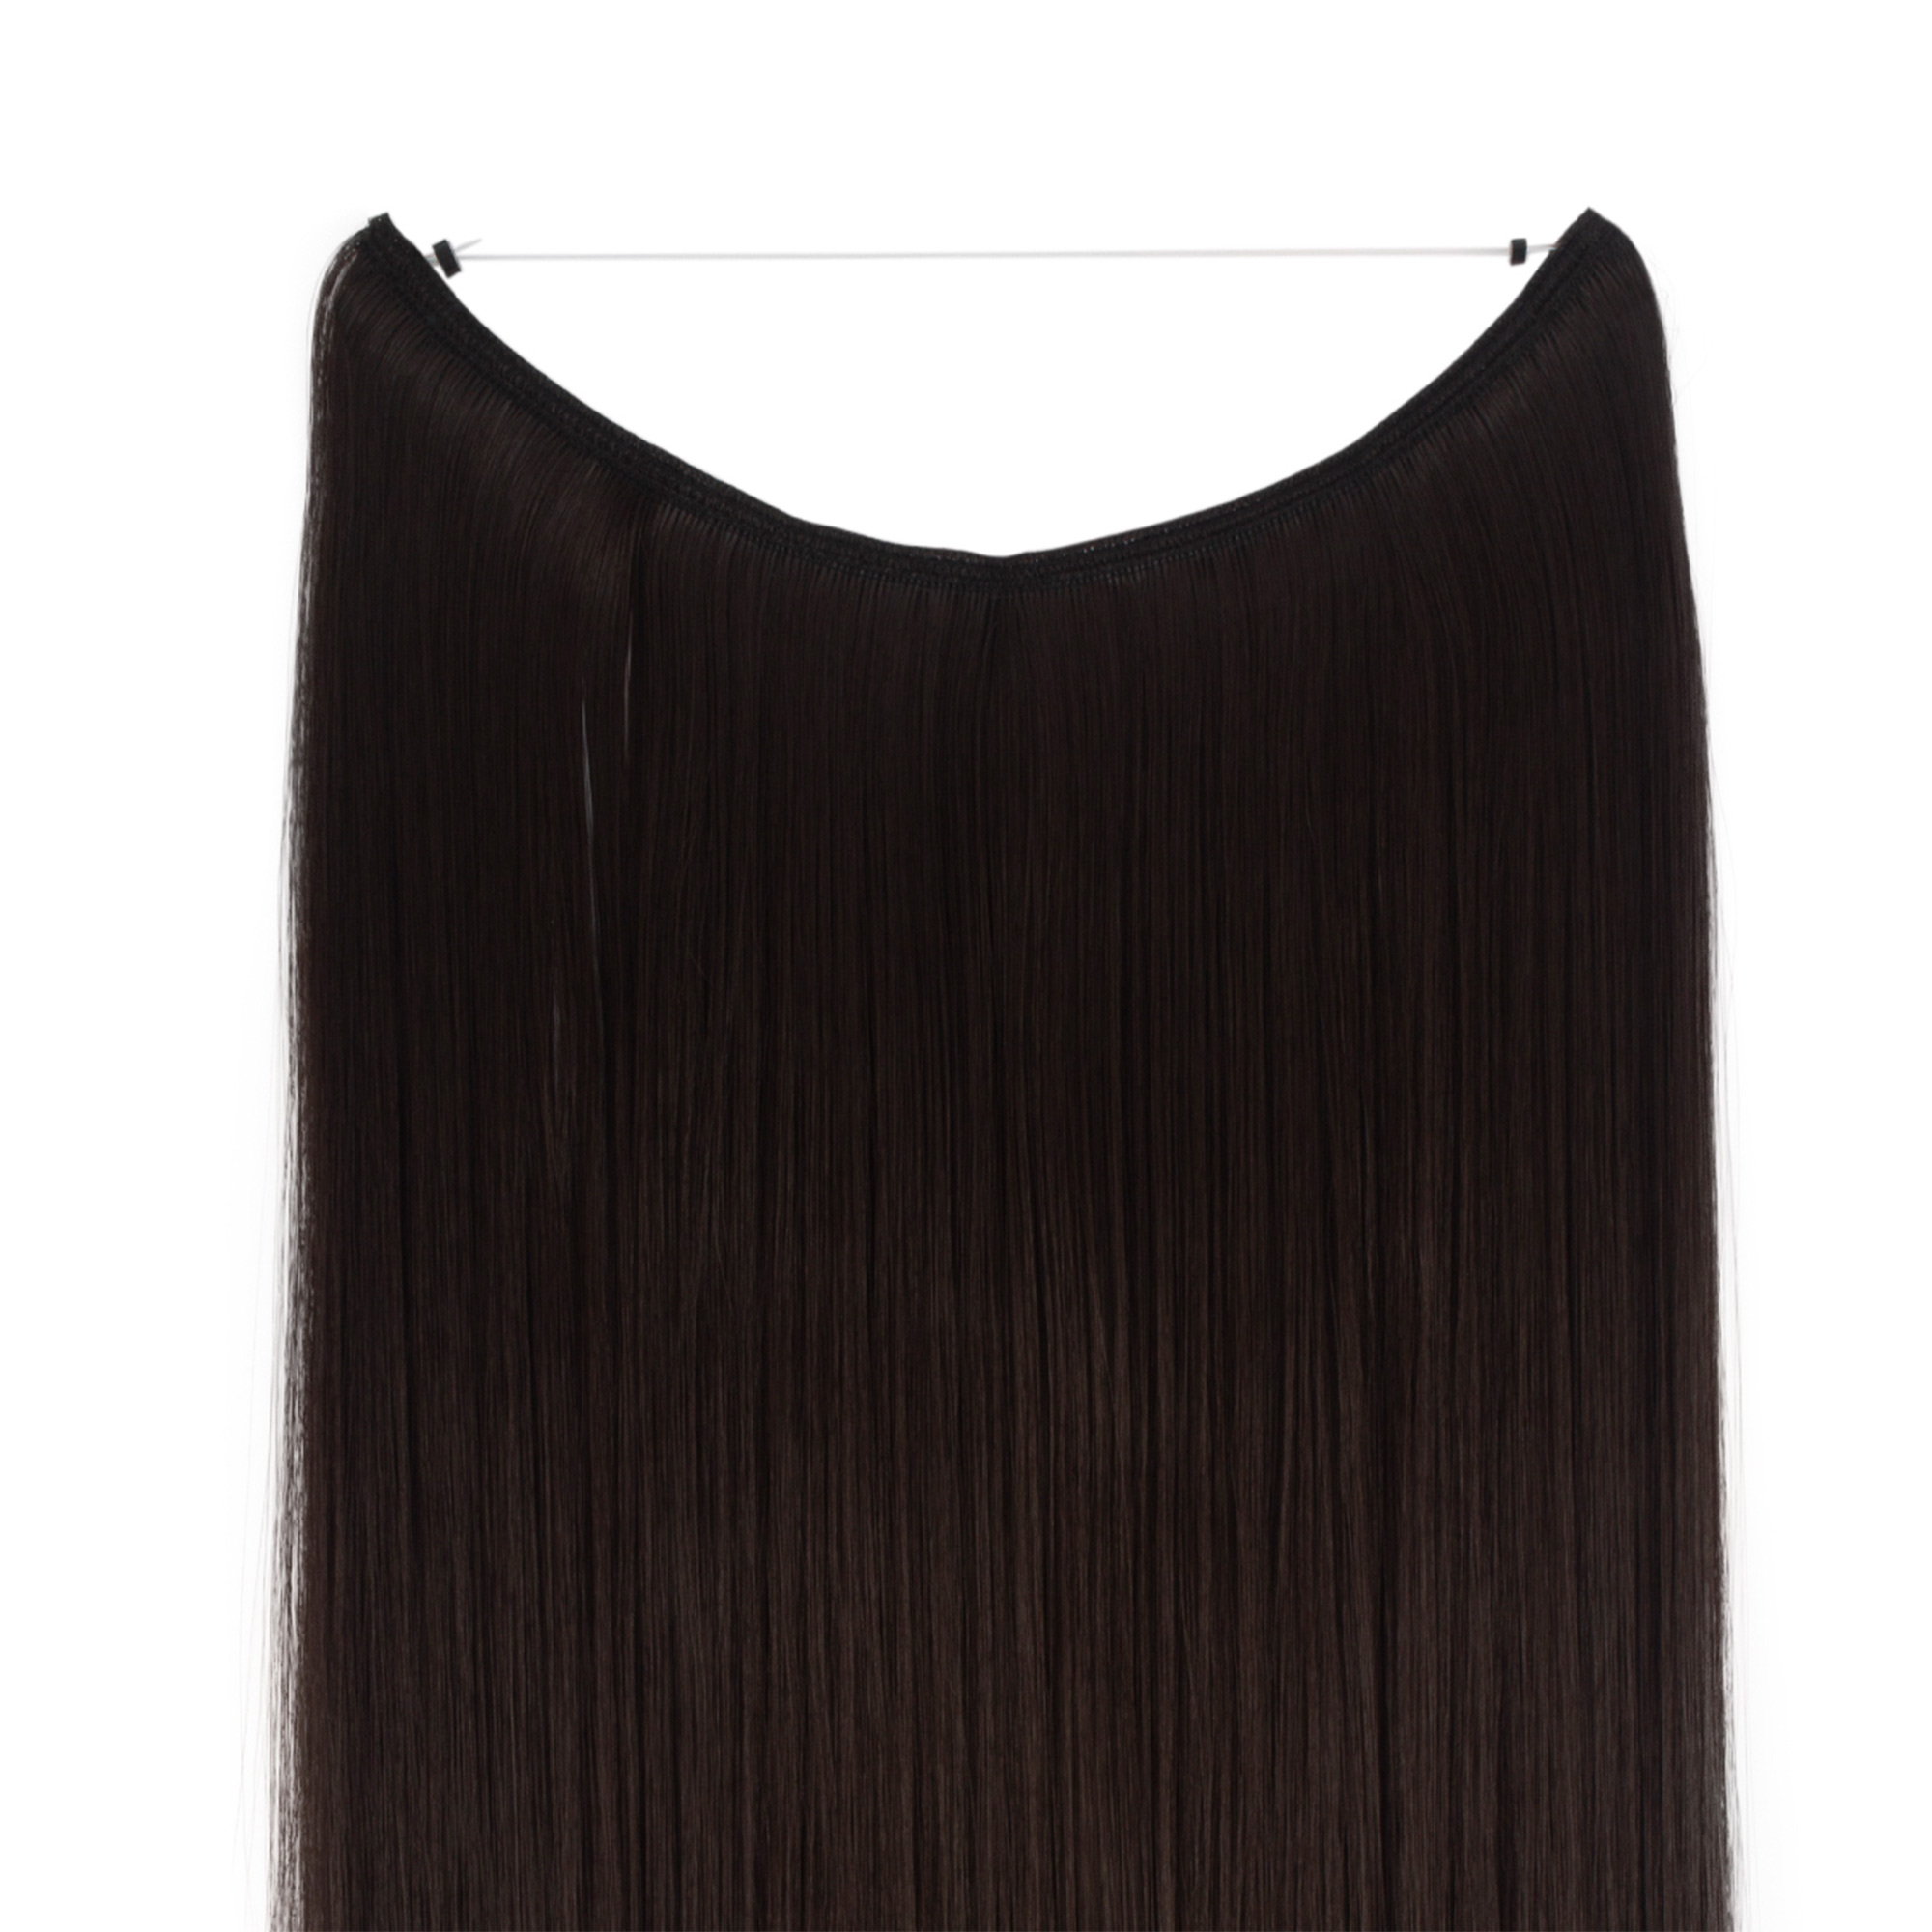 Long Straight 3/4 Full Head One Piece 20 inchs Invisible Wire Hair